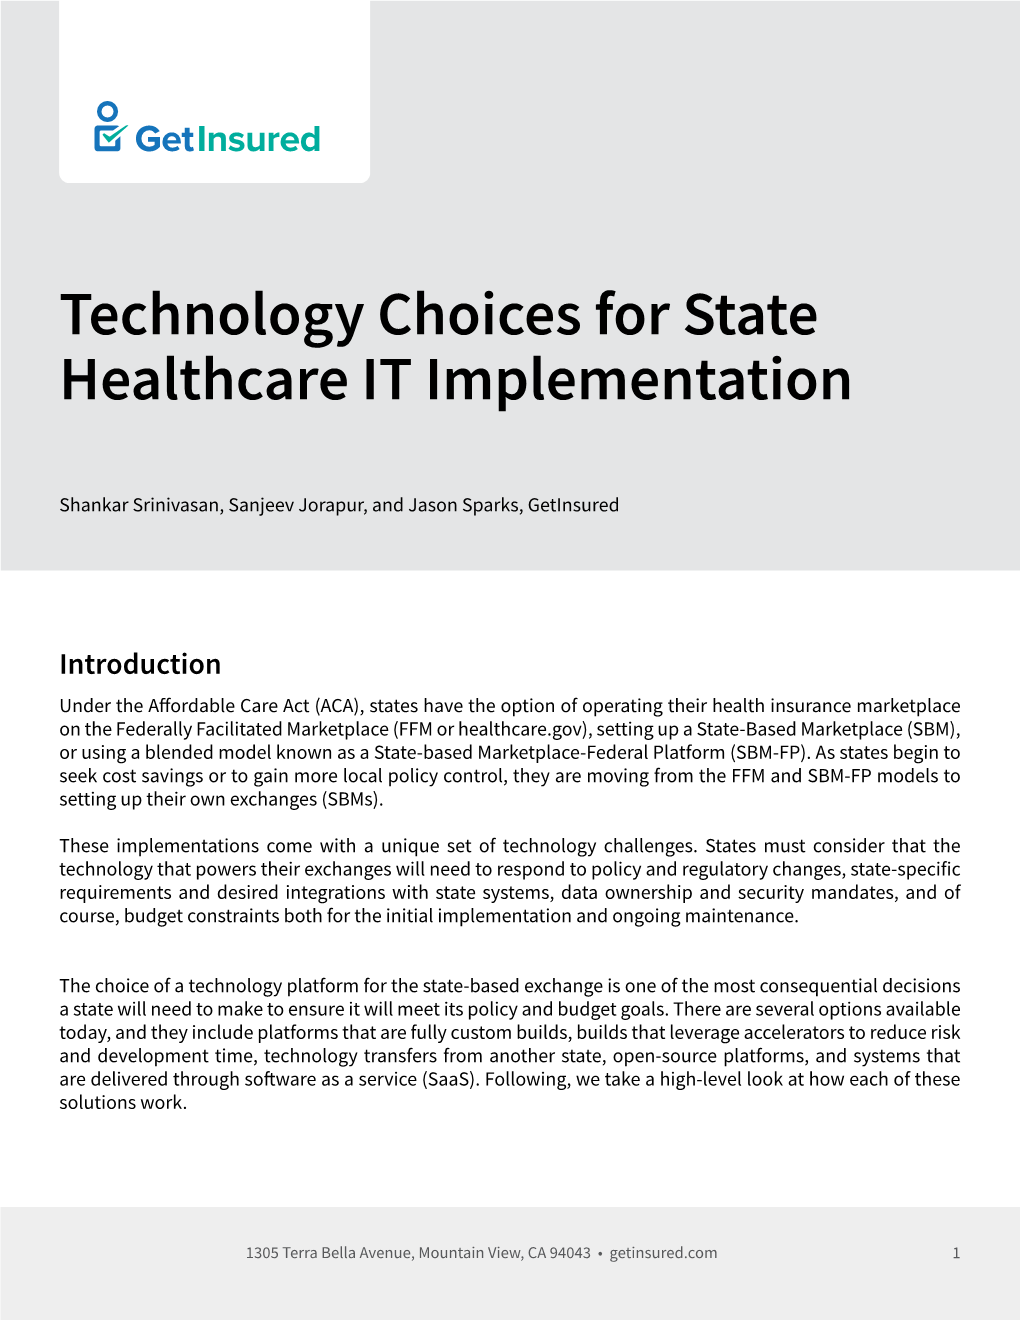 Technology Choices for State Healthcare IT Implementation